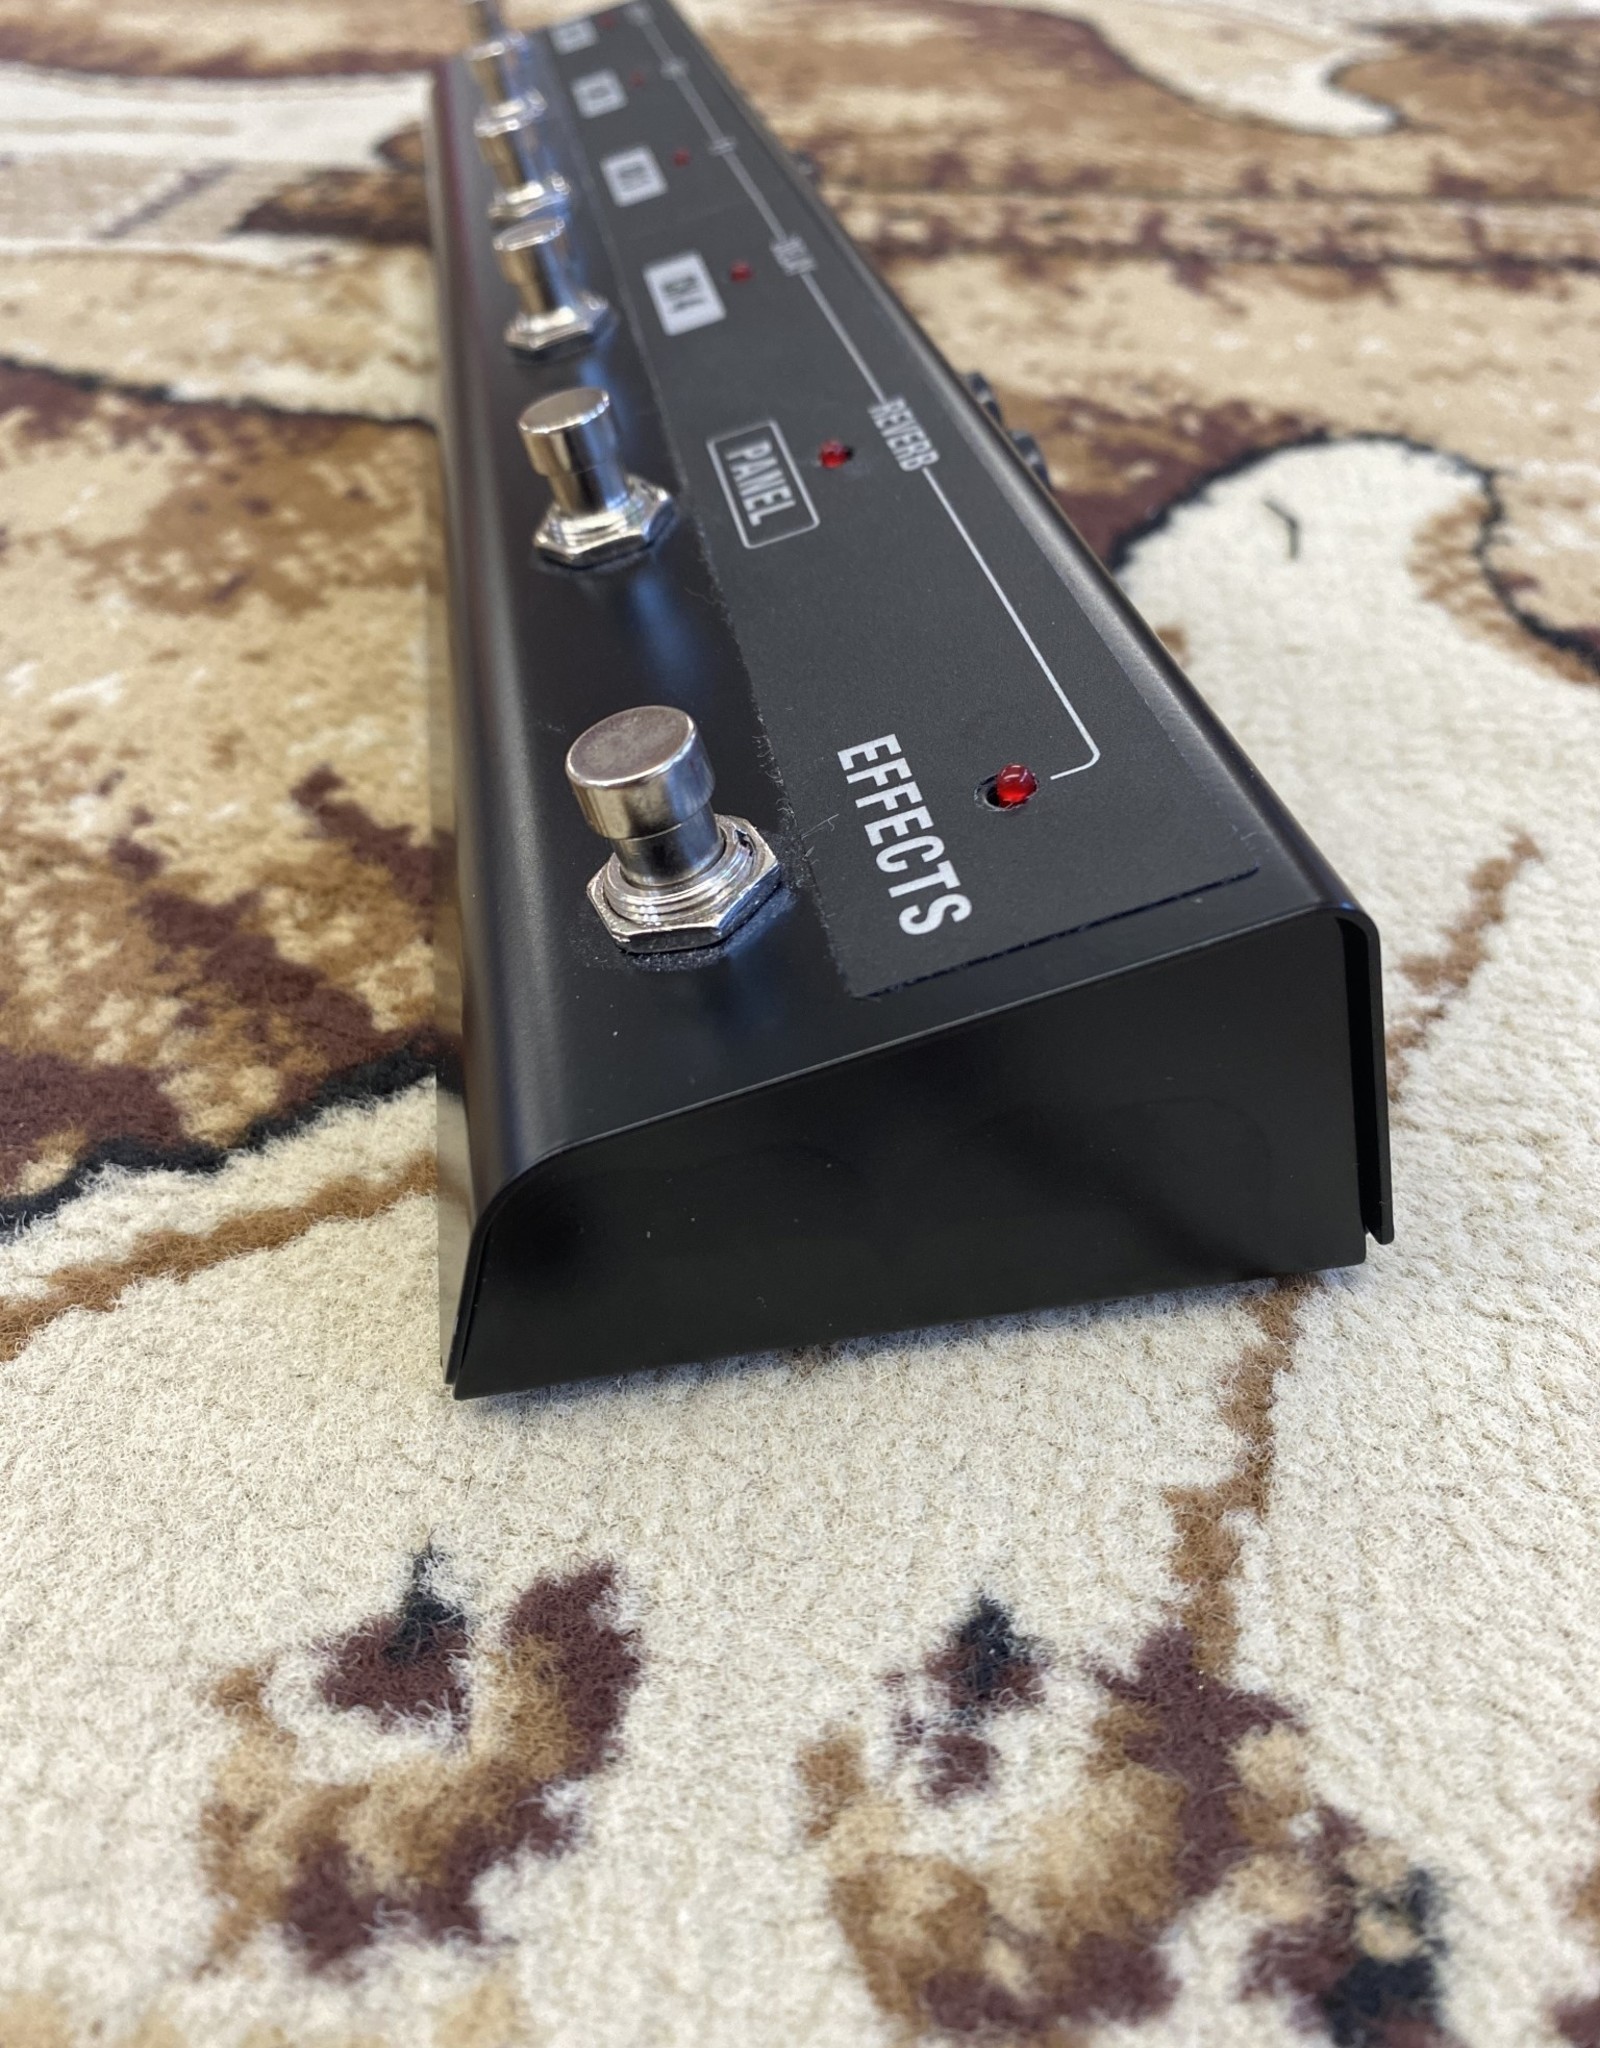 Boss Boss GA-FC Footswitch Controller (Used)